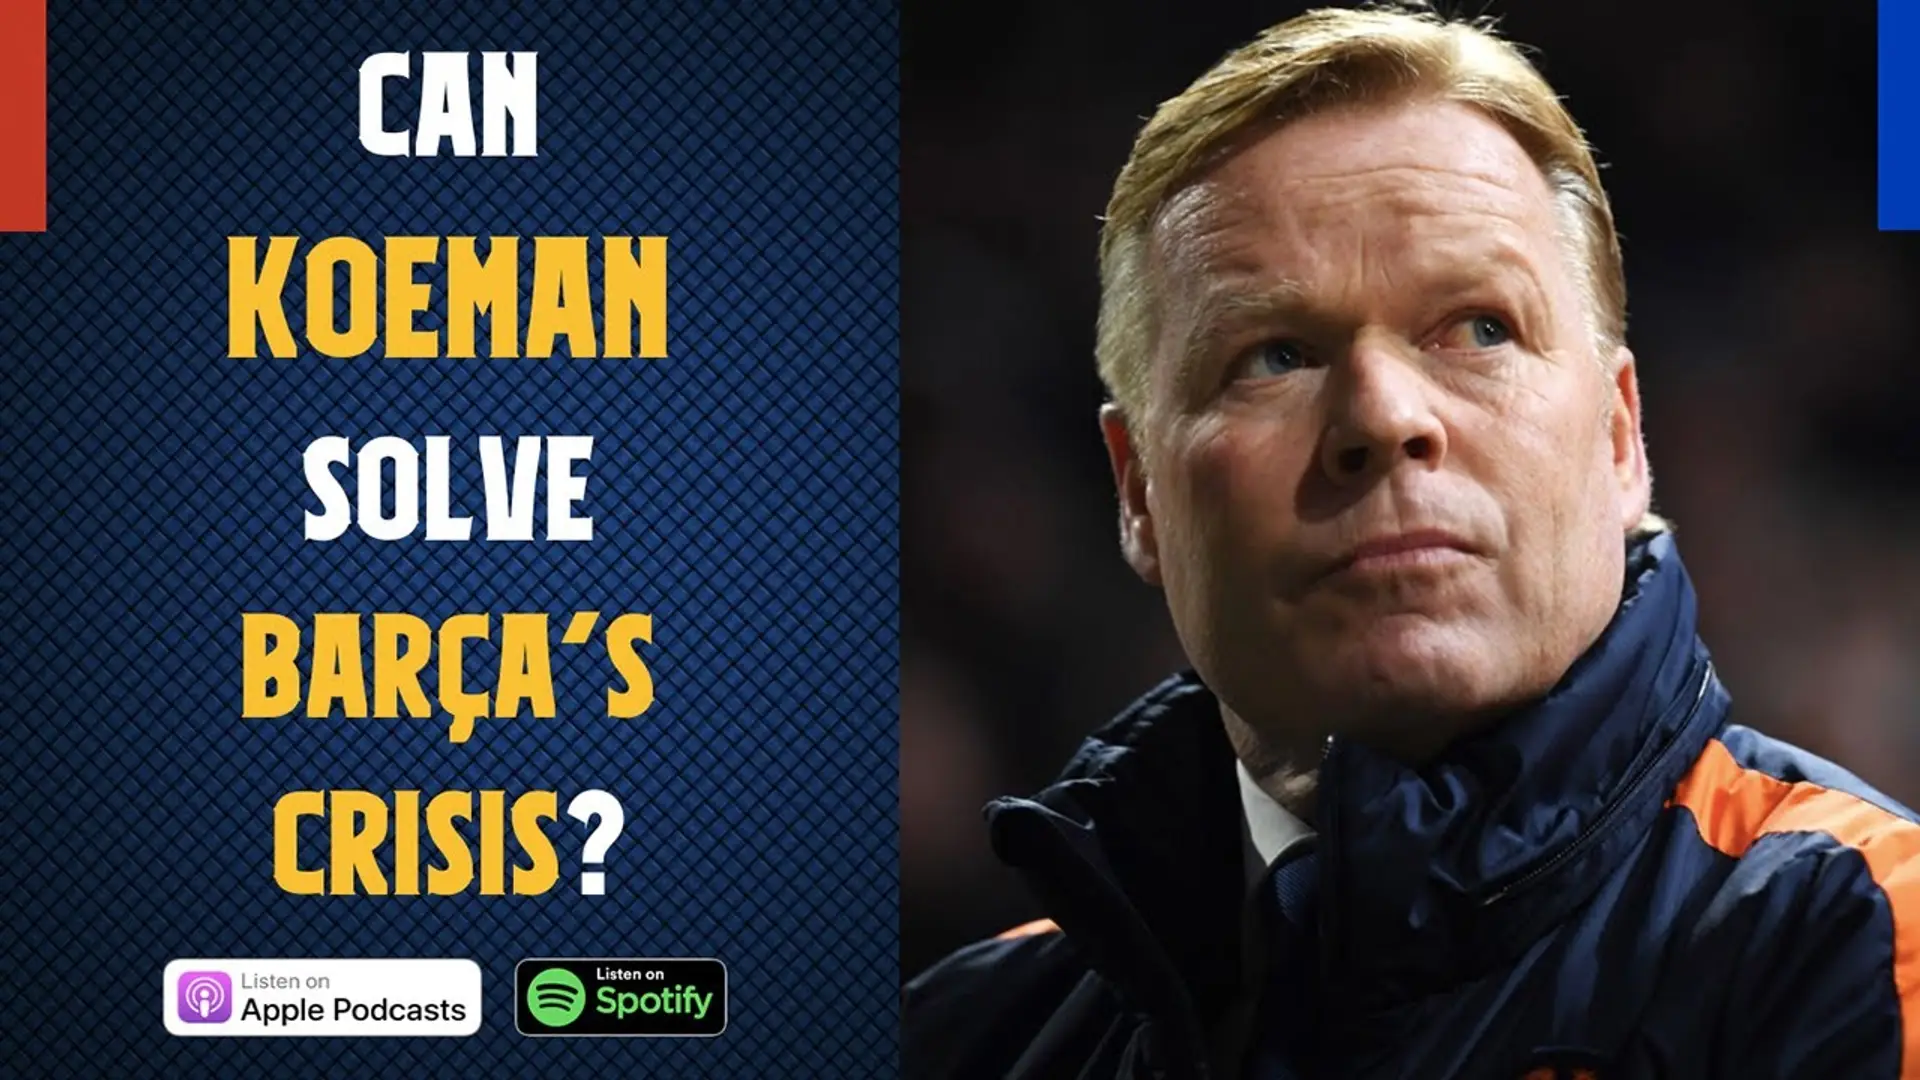 Can Koeman REALLY solve Barcelona's crisis? Messi future in doubt and Bartomeu's mistakes